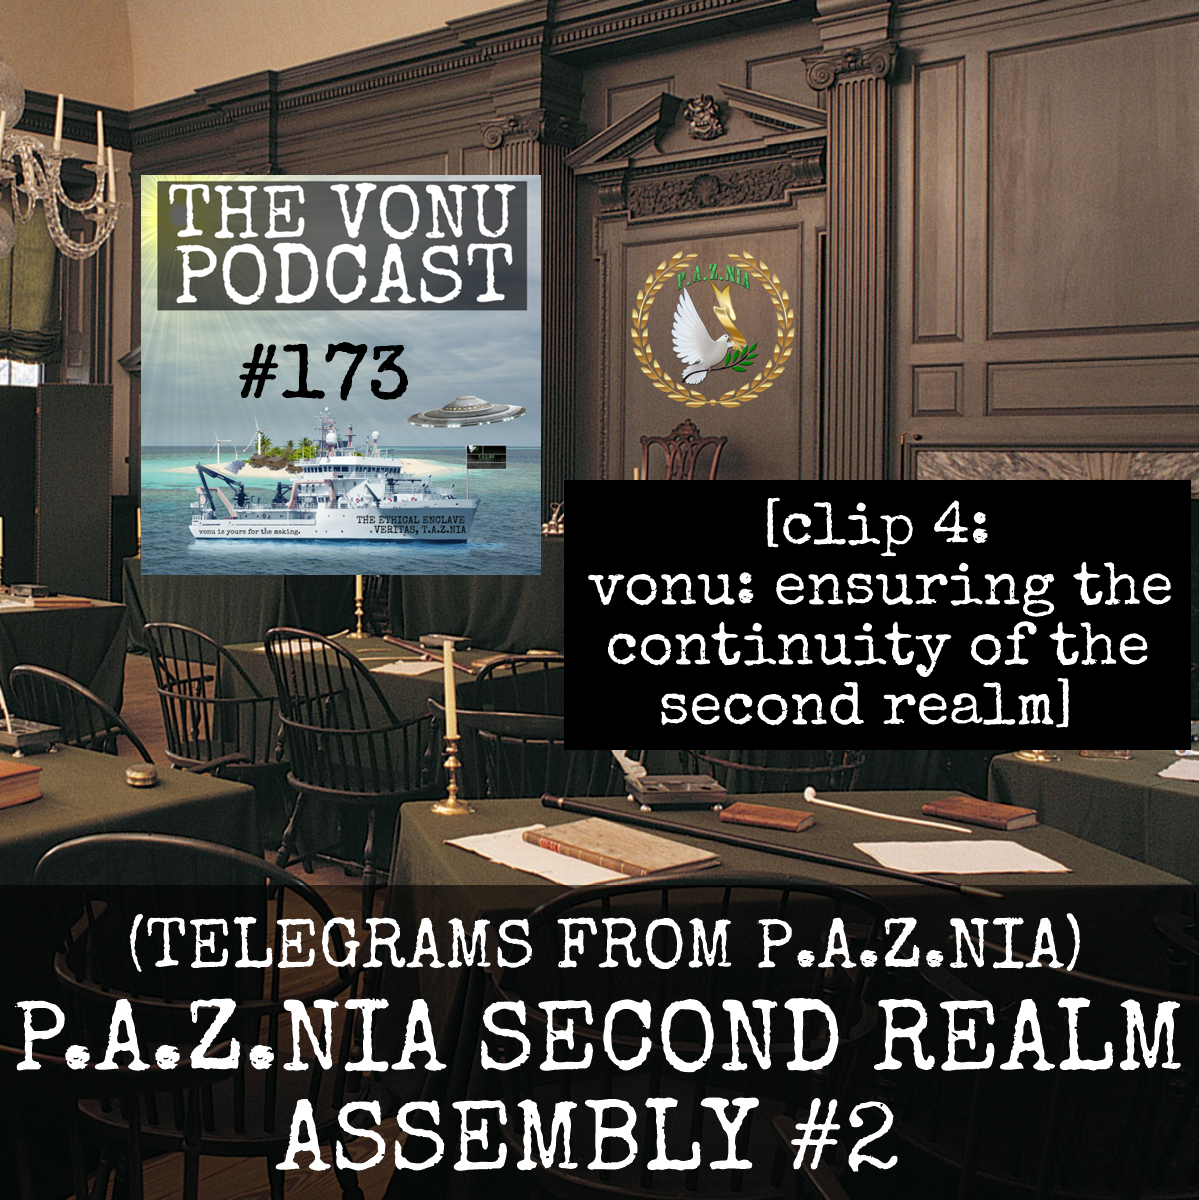 Vonu: Ensuring The Continuity of The Second Realm (& Lessons From The Mafia/Organized Crime)(P.A.Z.NIA Second Realm Assembly #2)